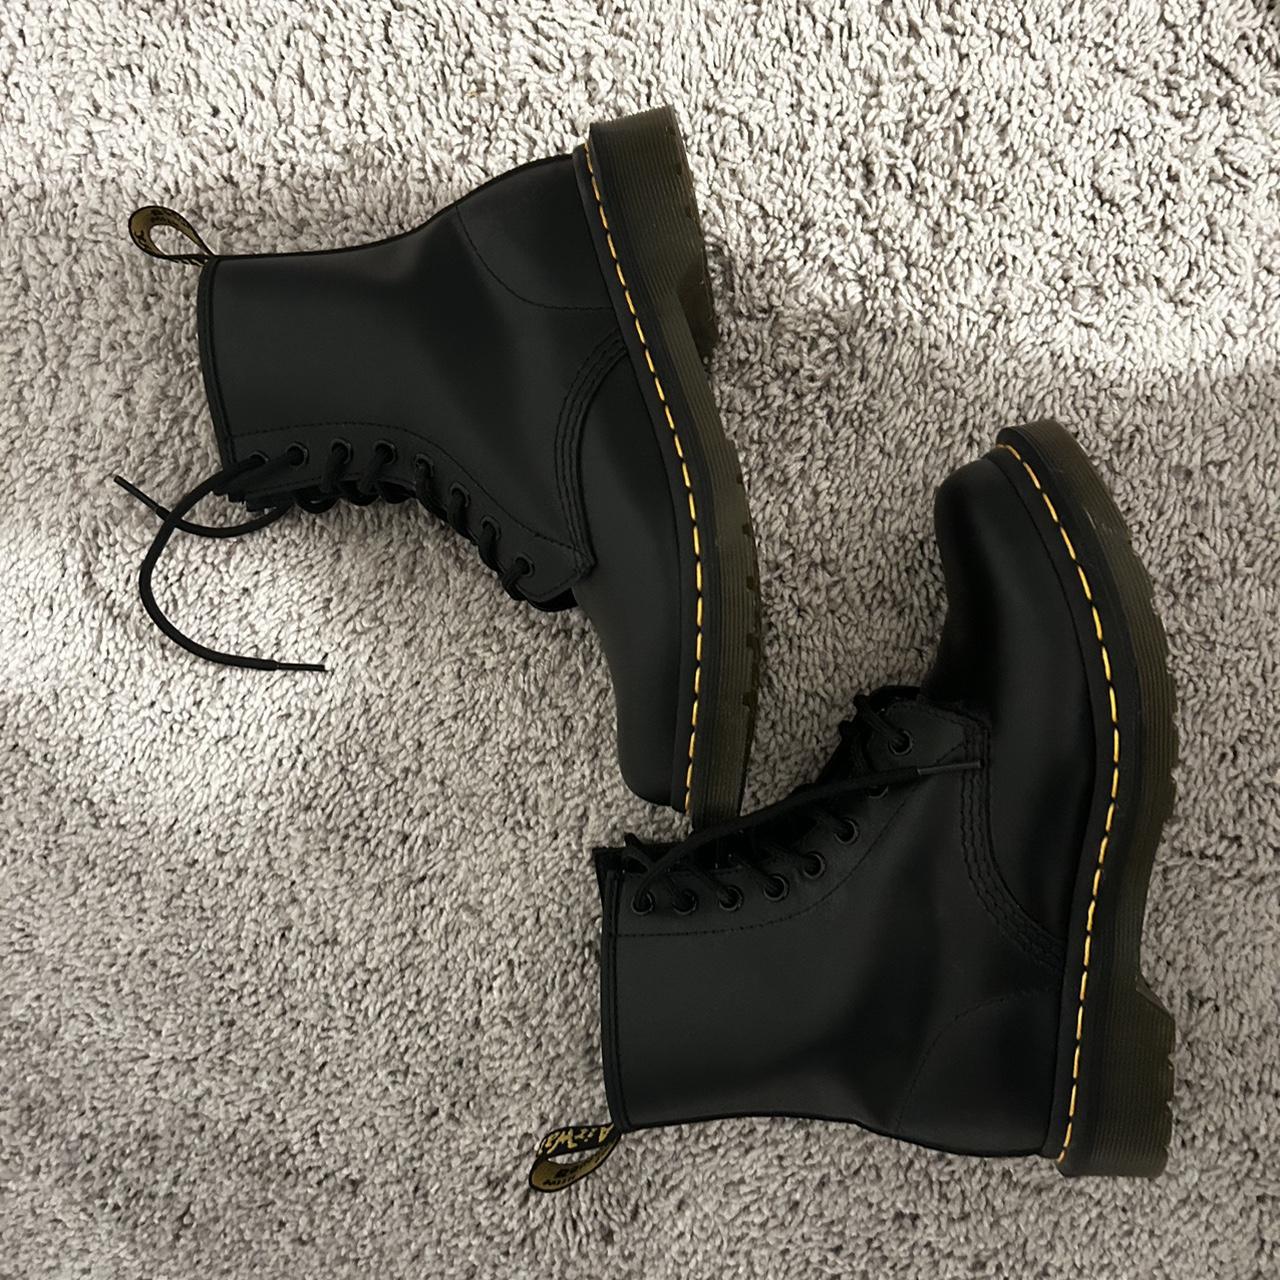 Perfect condition basically brand new. $100 or best - Depop